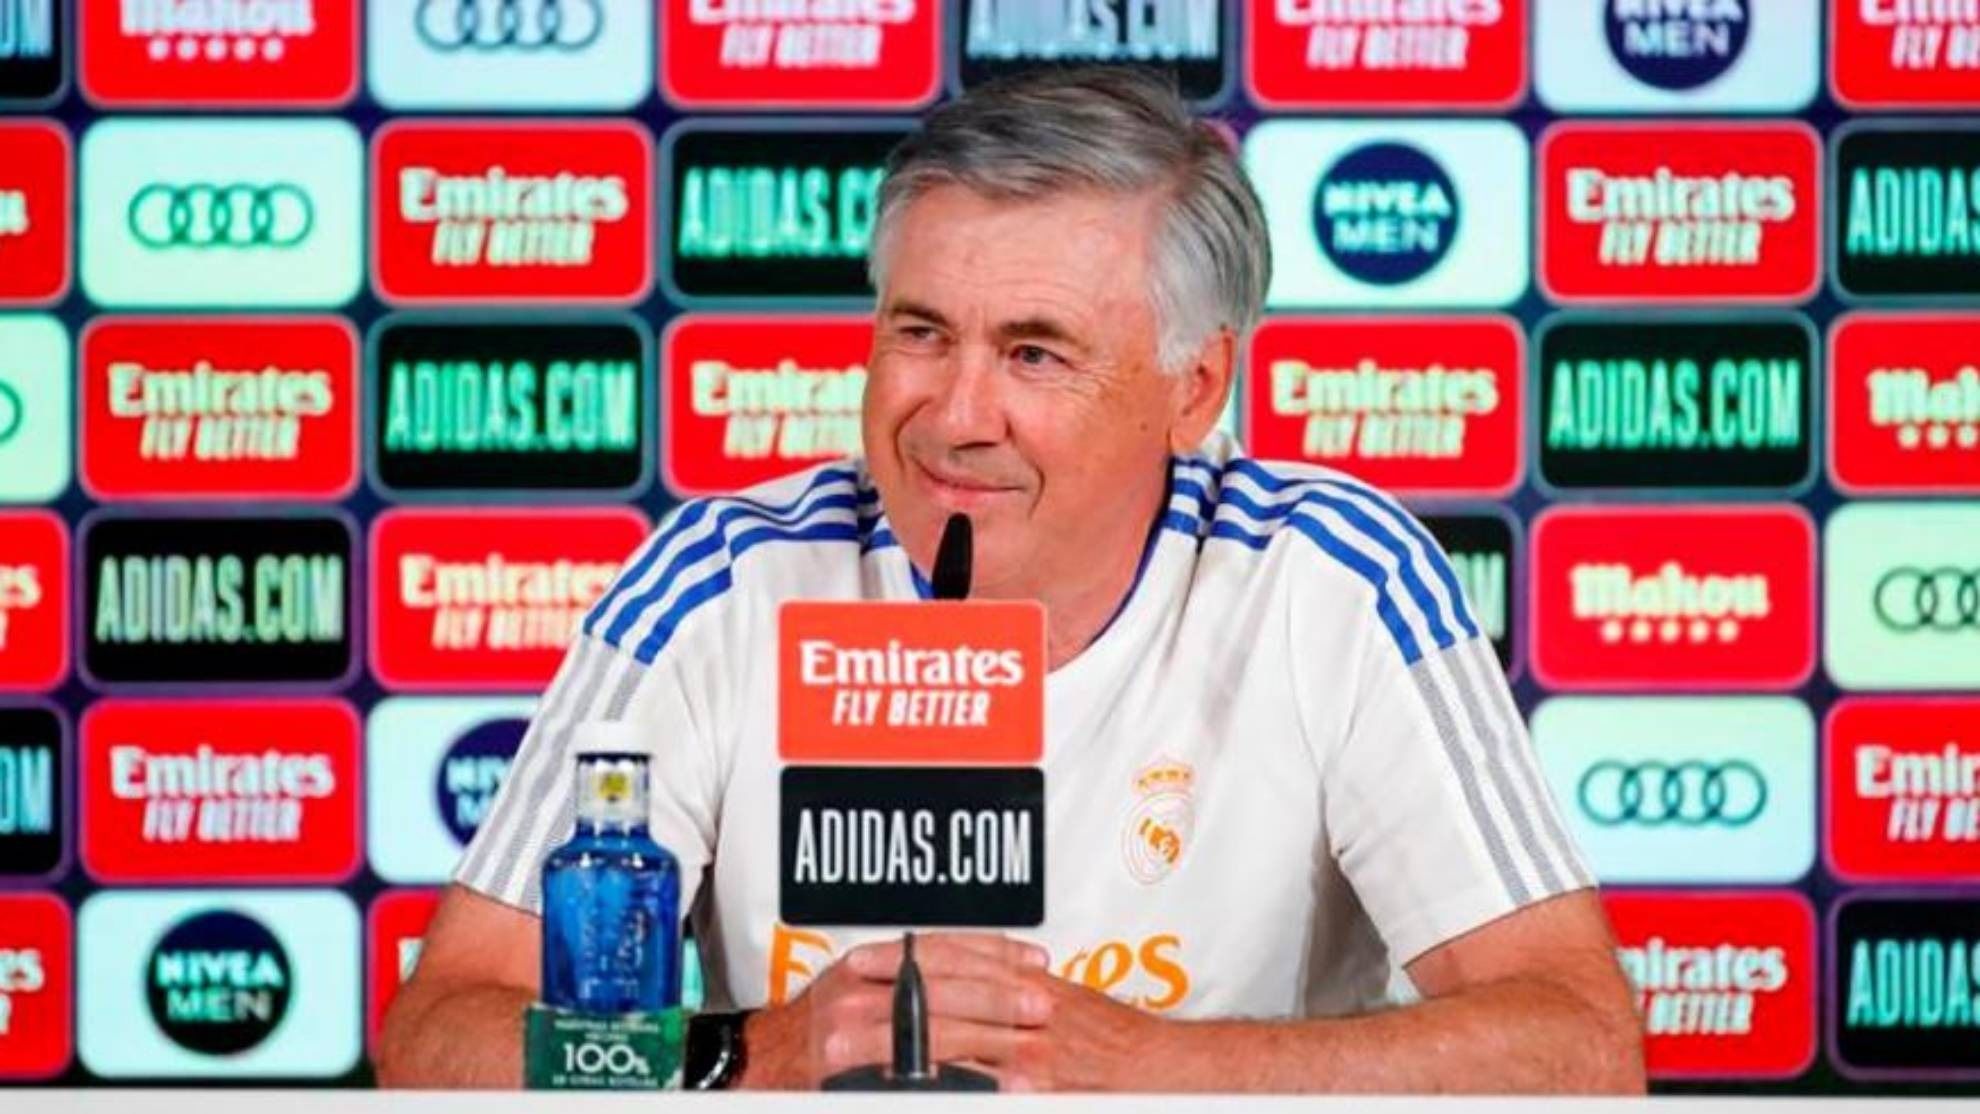 Ancelotti Is First Coach To Knock Guardiola's Teams Out Of Champions League Three Times